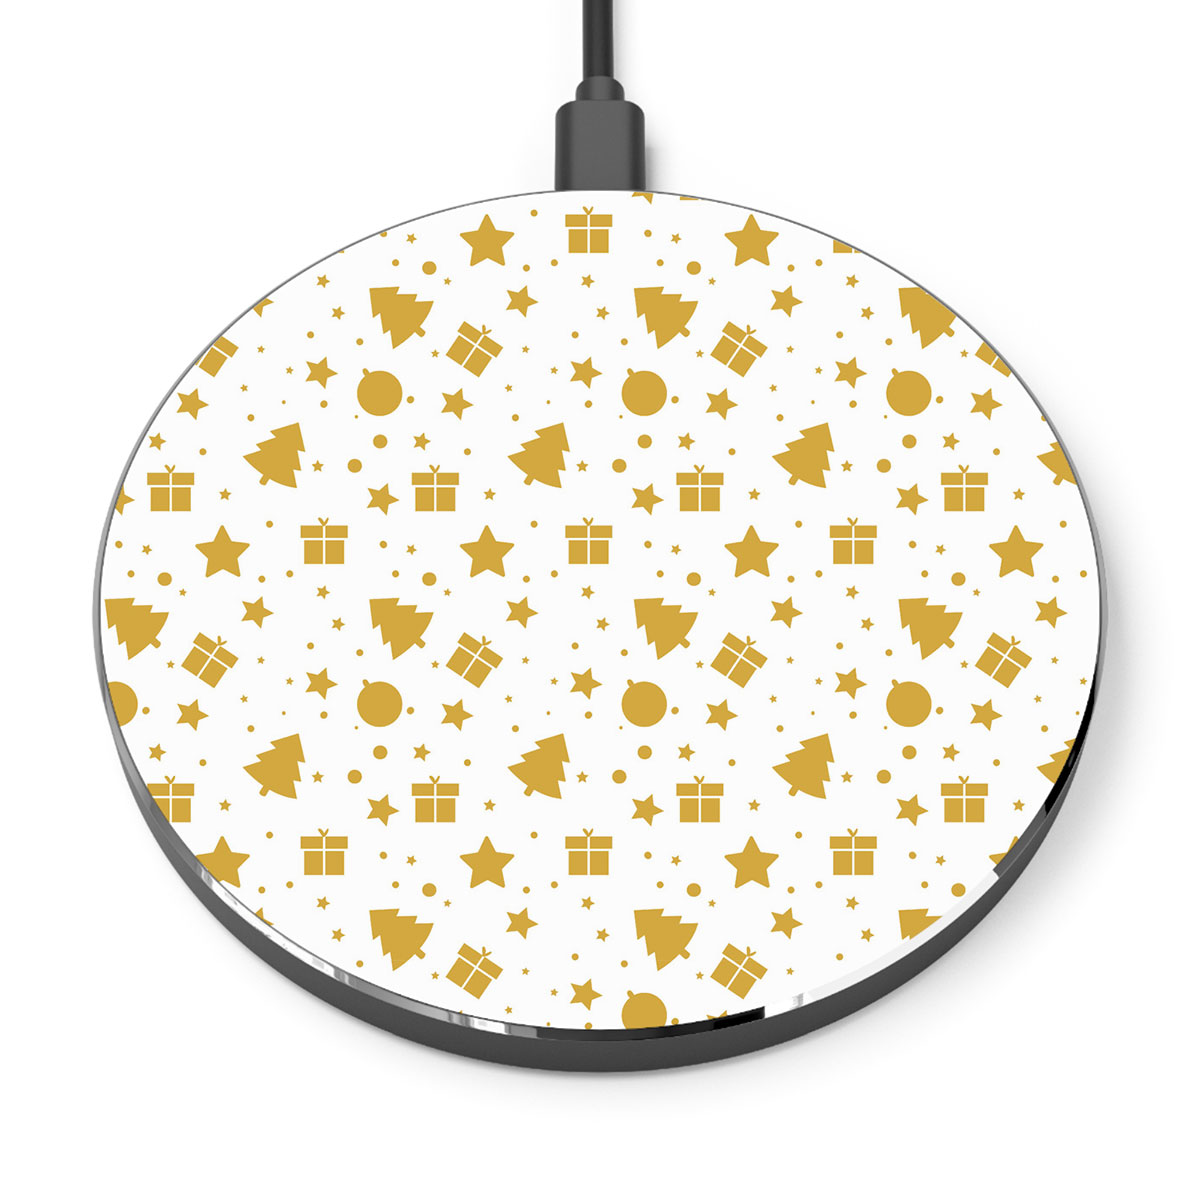 Christmas Gifts, Baudles And Pine Tree Silhouette Filled In Gold Color Pattern Printed Wireless Charger